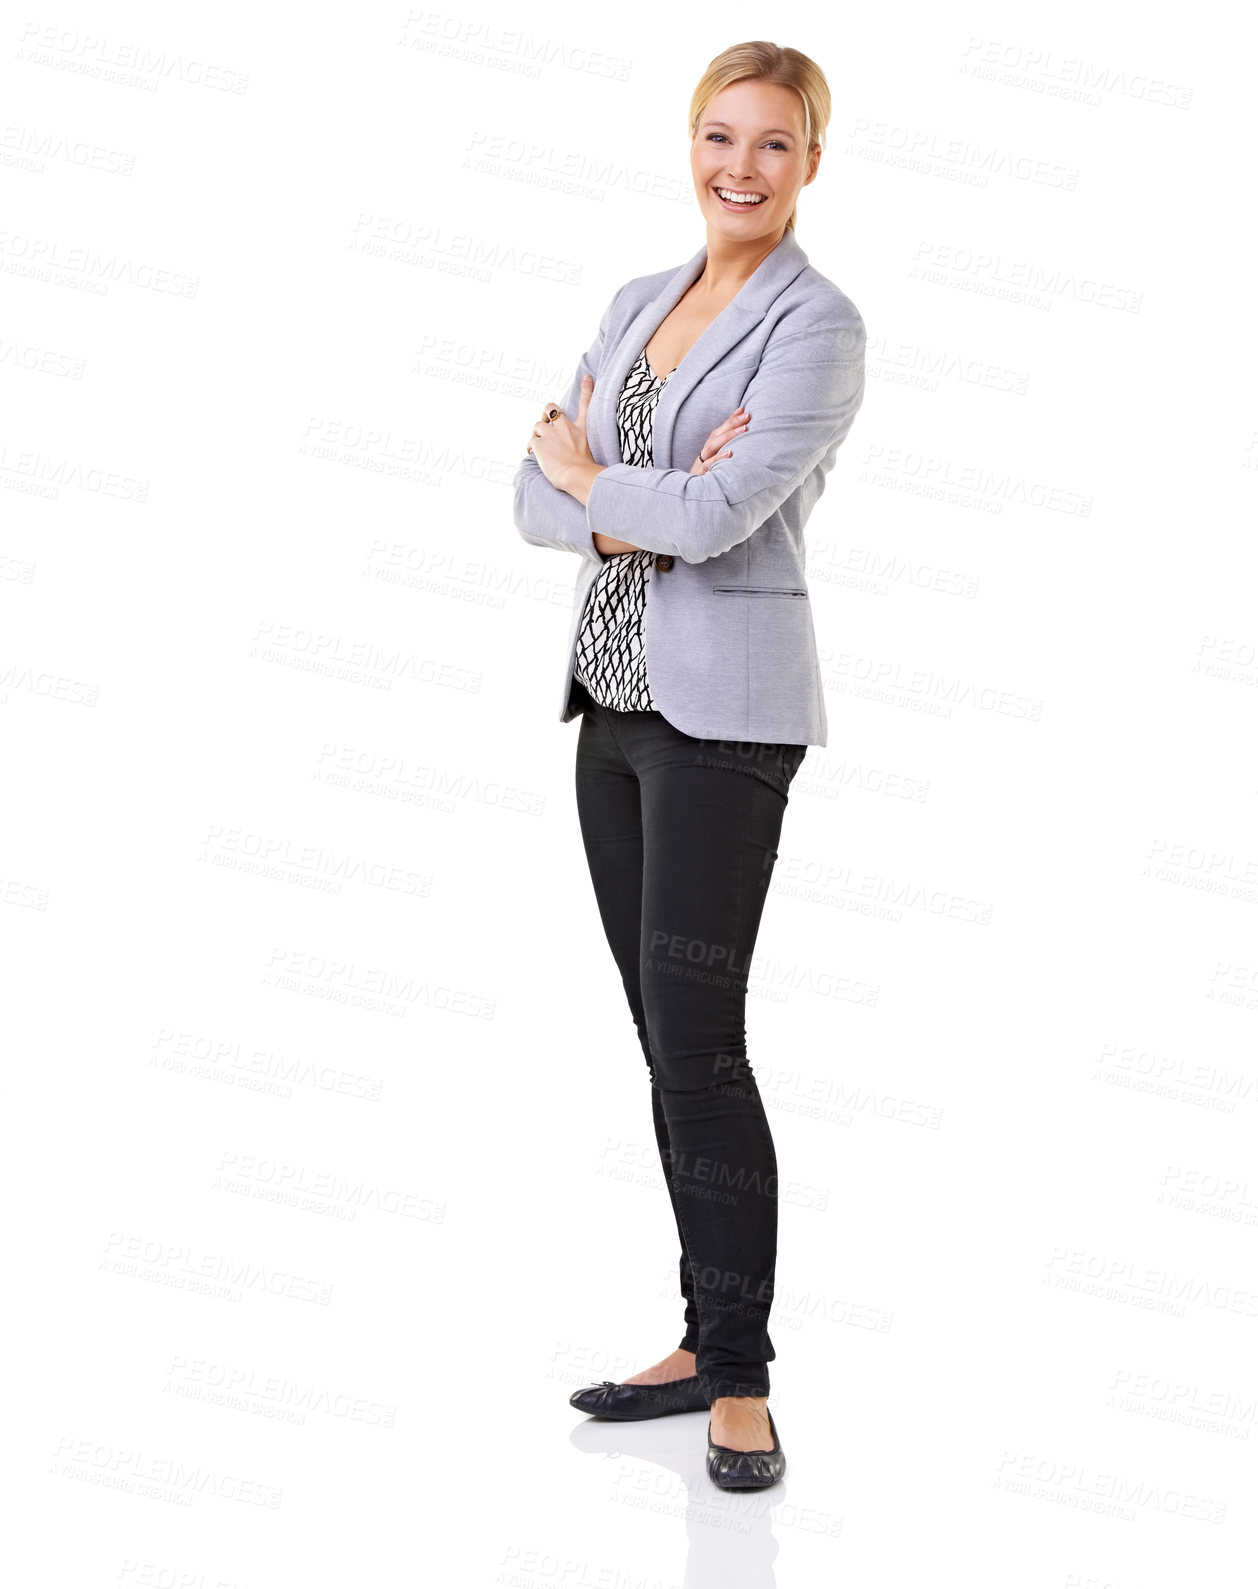 Buy stock photo Full length studio shot of a young woman with her arms crossed isolated on white